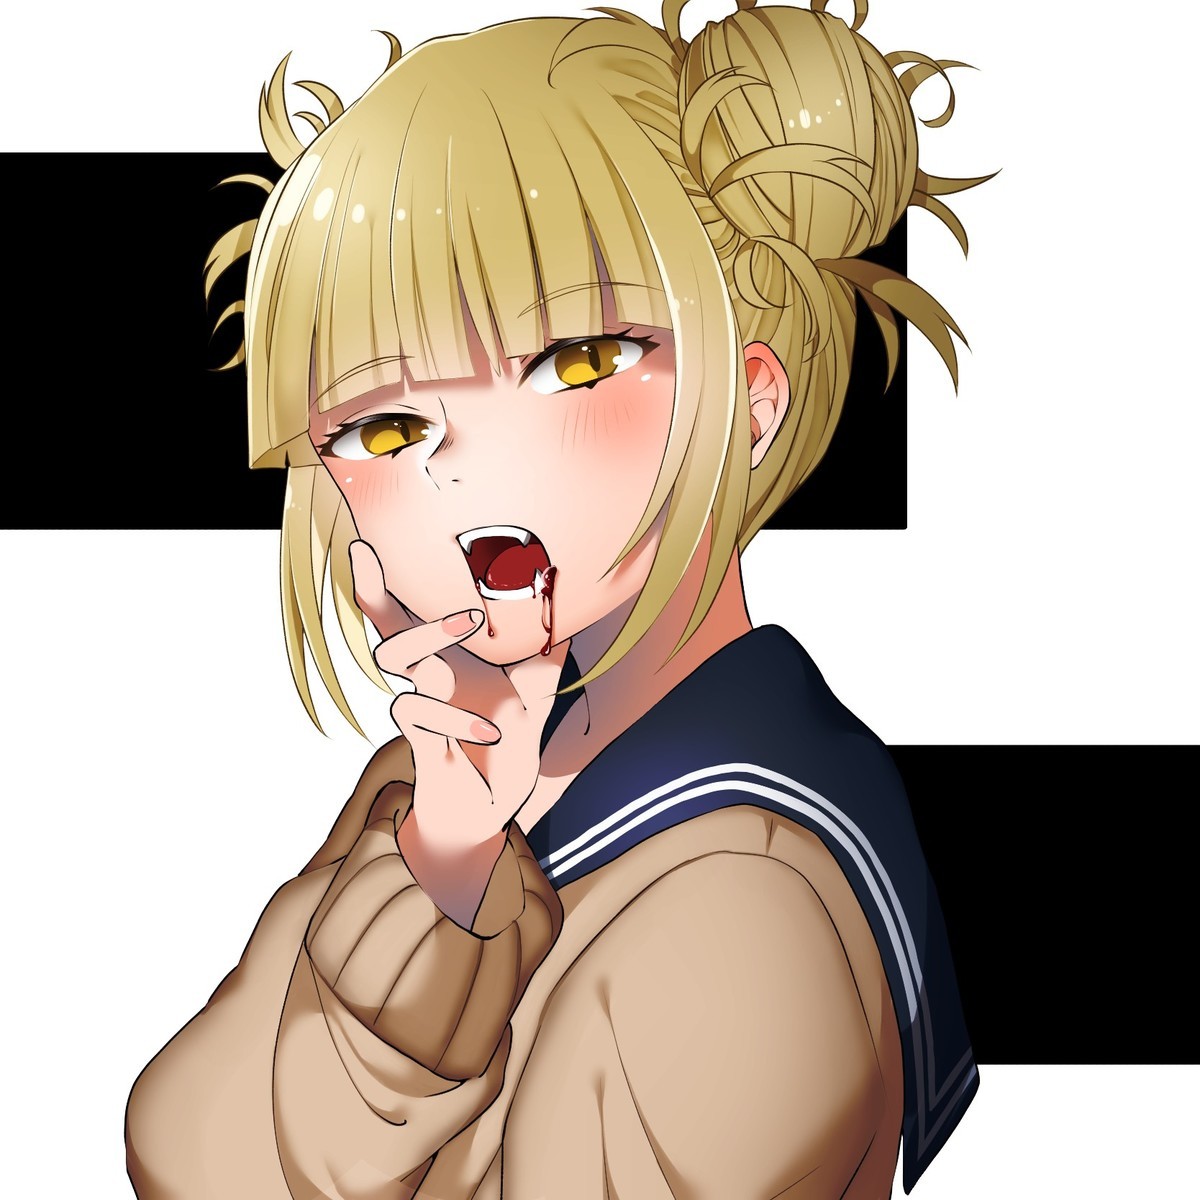 Daily Toga - 1022: Strawberry Jam. join list: DailyToga (477 subs)Mention History Source: .